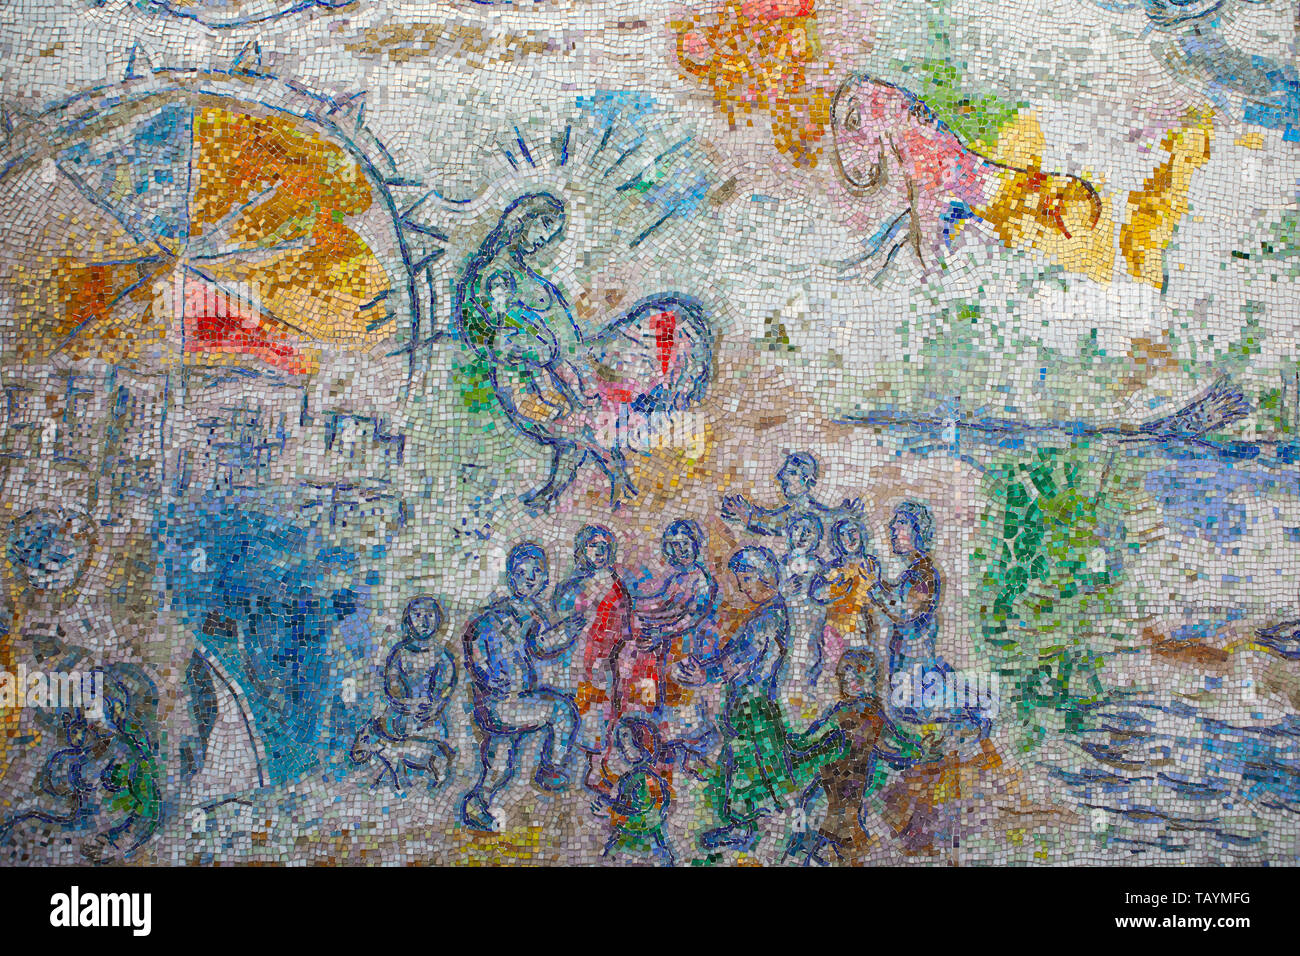 Four Seasons mosaic by Marc Chagall, in Chase Tower Plaza, Chicago, Illinois, United States Stock Photo